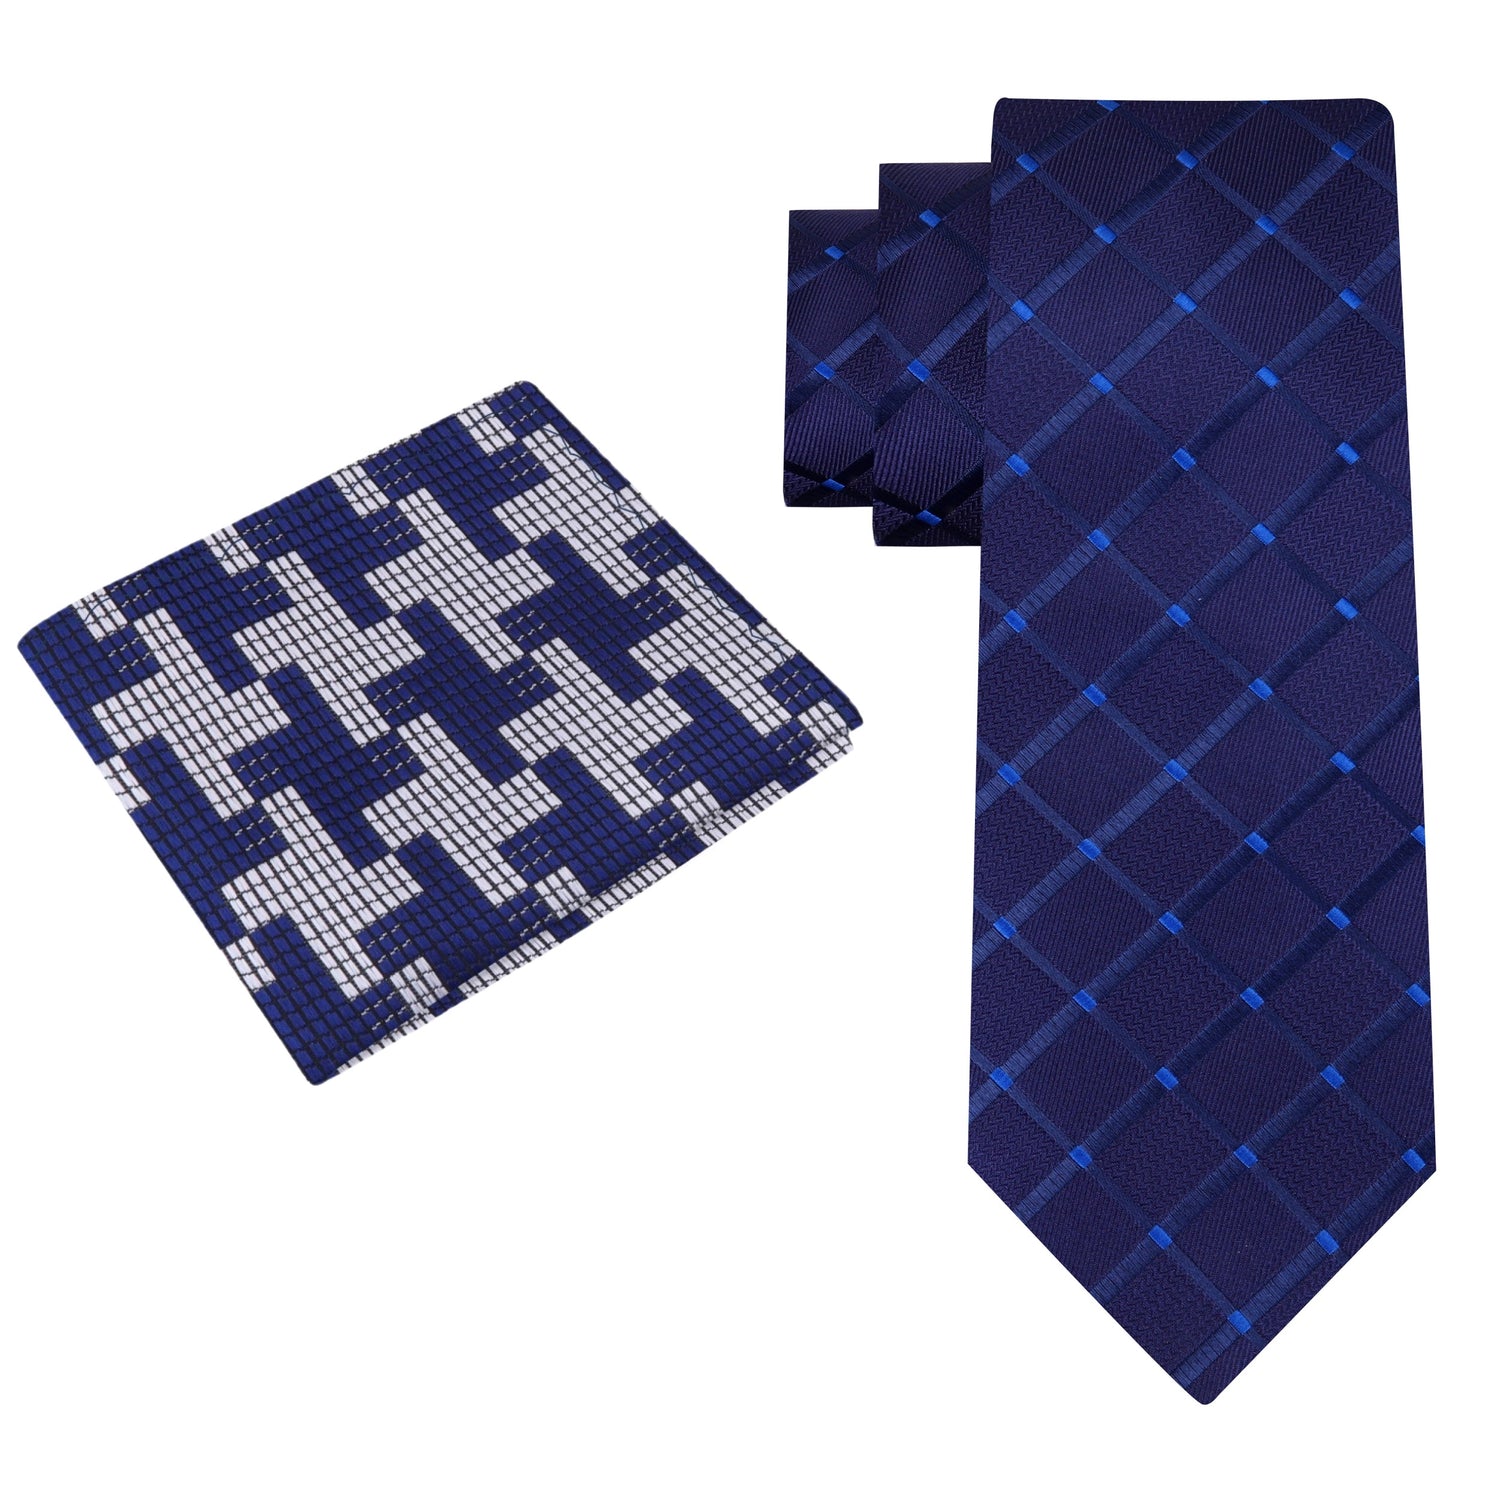 Alt View: Blue Necktie with a Geometric Texture and Blue, Grey Hounds Tooth Square